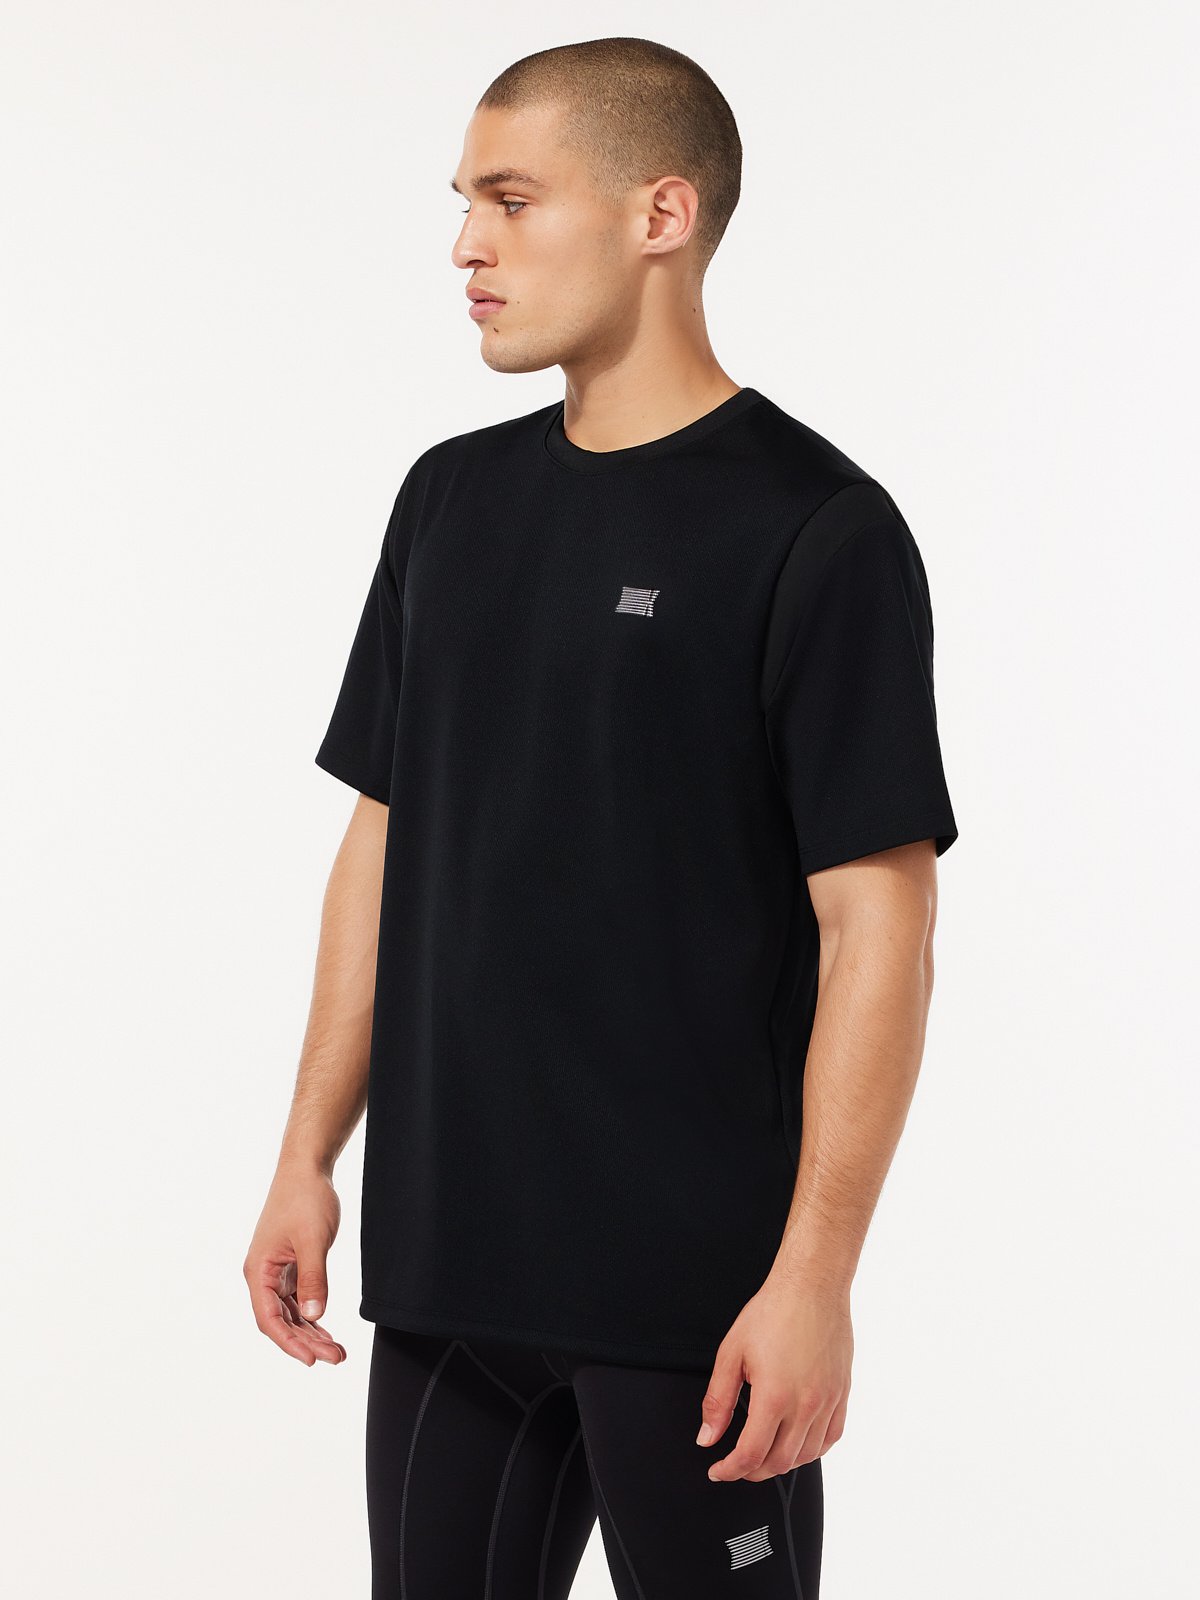 Breakout Base Layer Tee